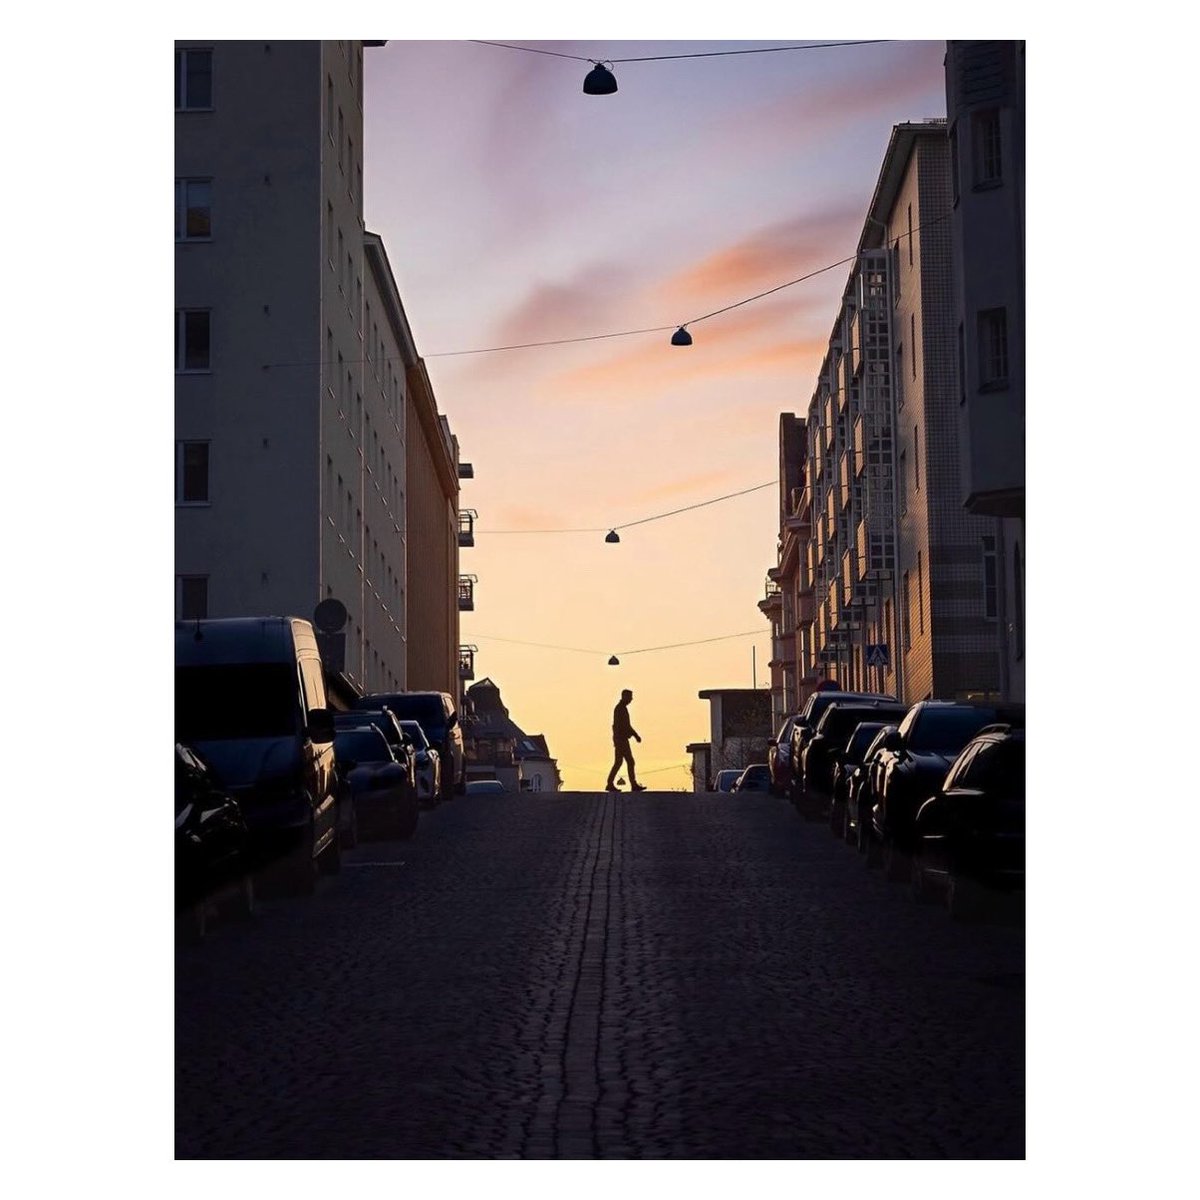 This Street Shot was taken by @mymood.photo 
We want to see all genres of Street Shots. Please continue to use #ssicollaborative and follow @streetshotsinternational for the chance to be featured.
#StreetPhotography #streetshots #citylife #sunset #sundown